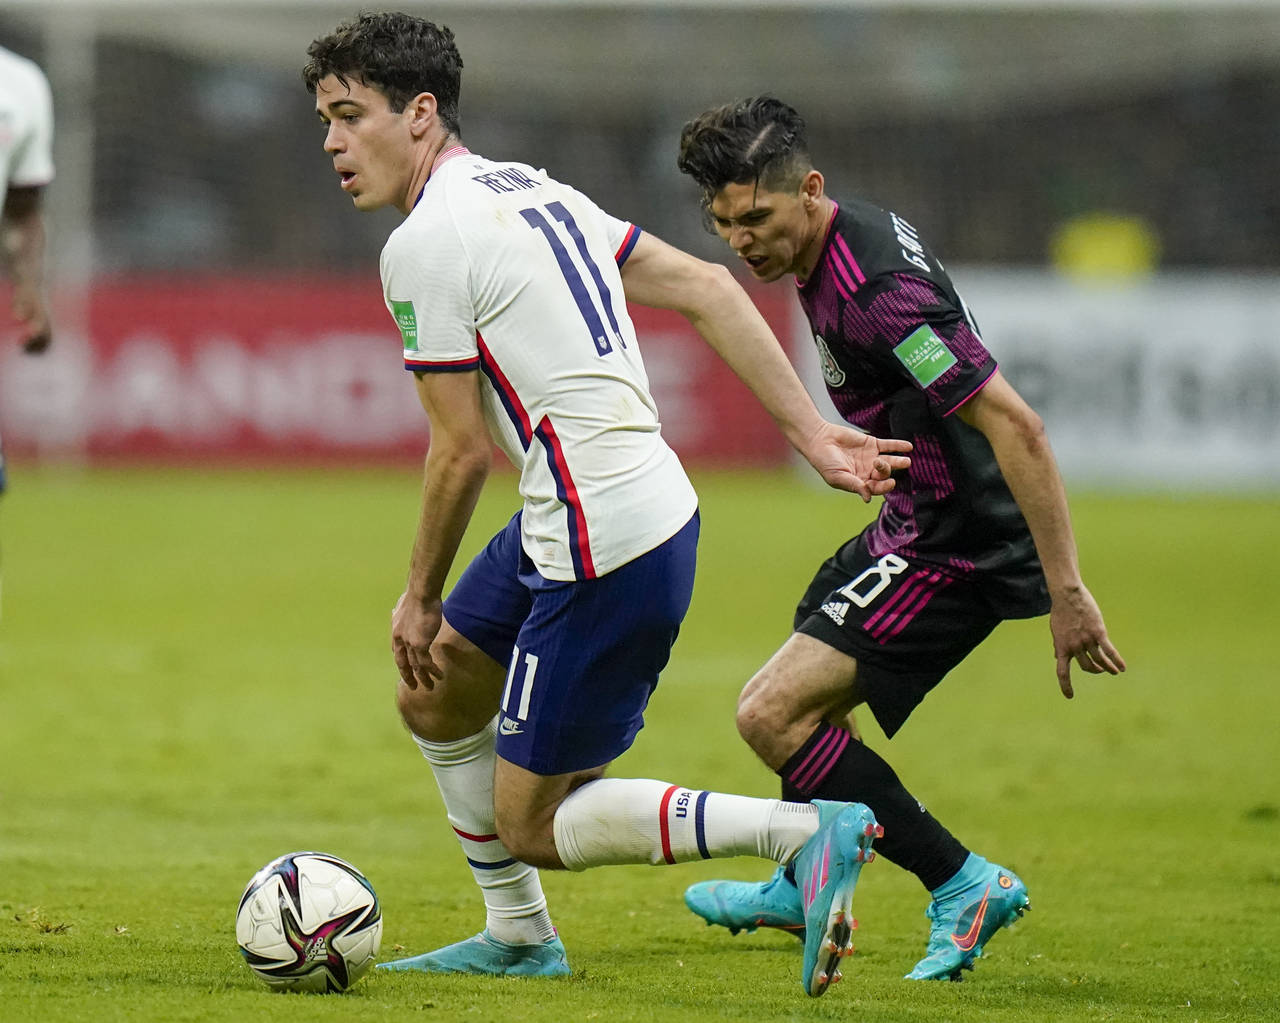 United States' Giovanni Reyna, left, dribbles the ball chased by Mexico's Gerardo Arteaga during a ...